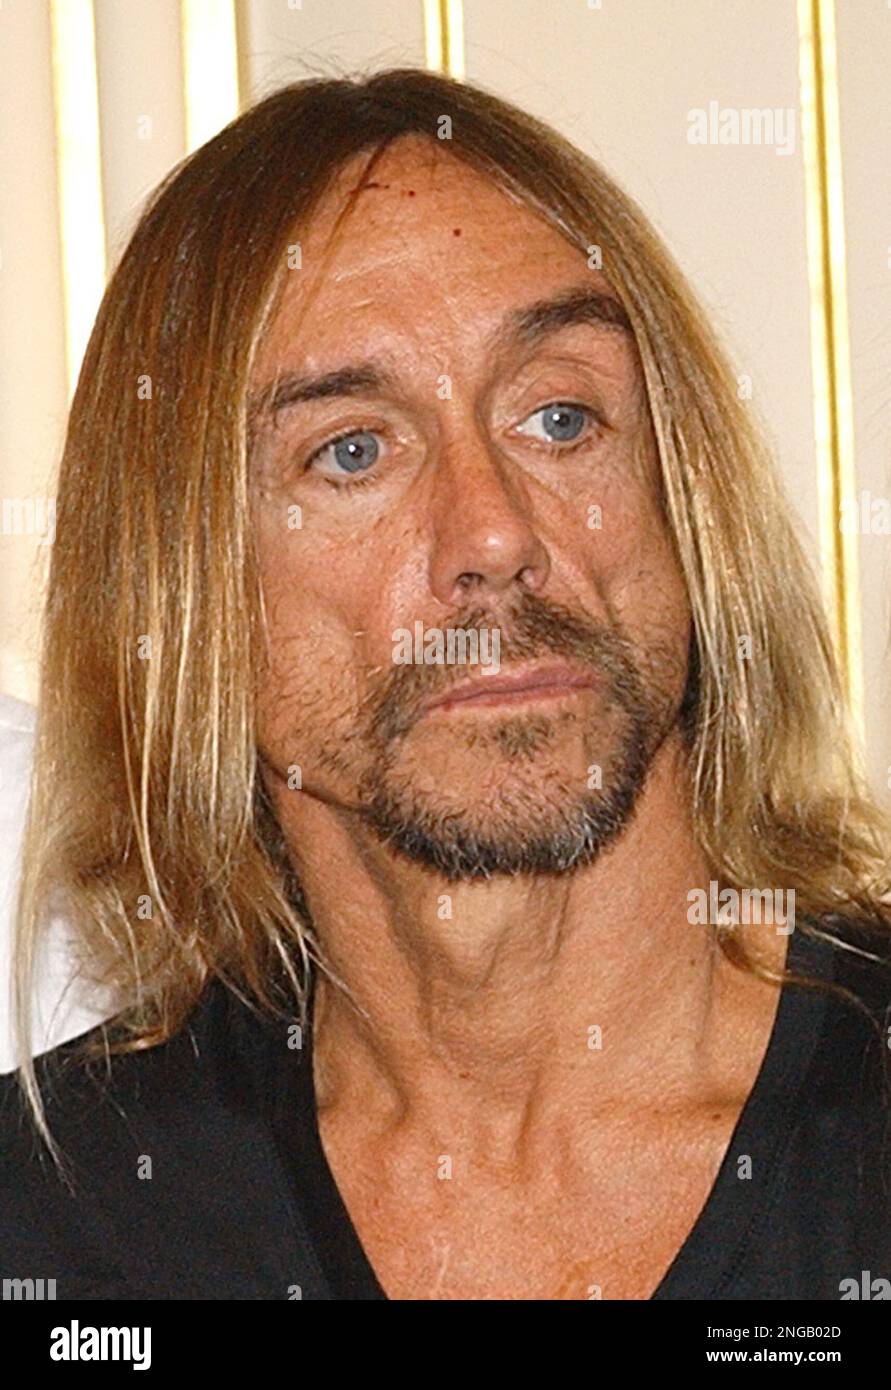 FILE ** Iggy Pop is pictured in Paris in this Saturday June 21, 2003 file  photo. Iggy Pop plays music too loud, according to officials in the Swiss  city of Lucerne.